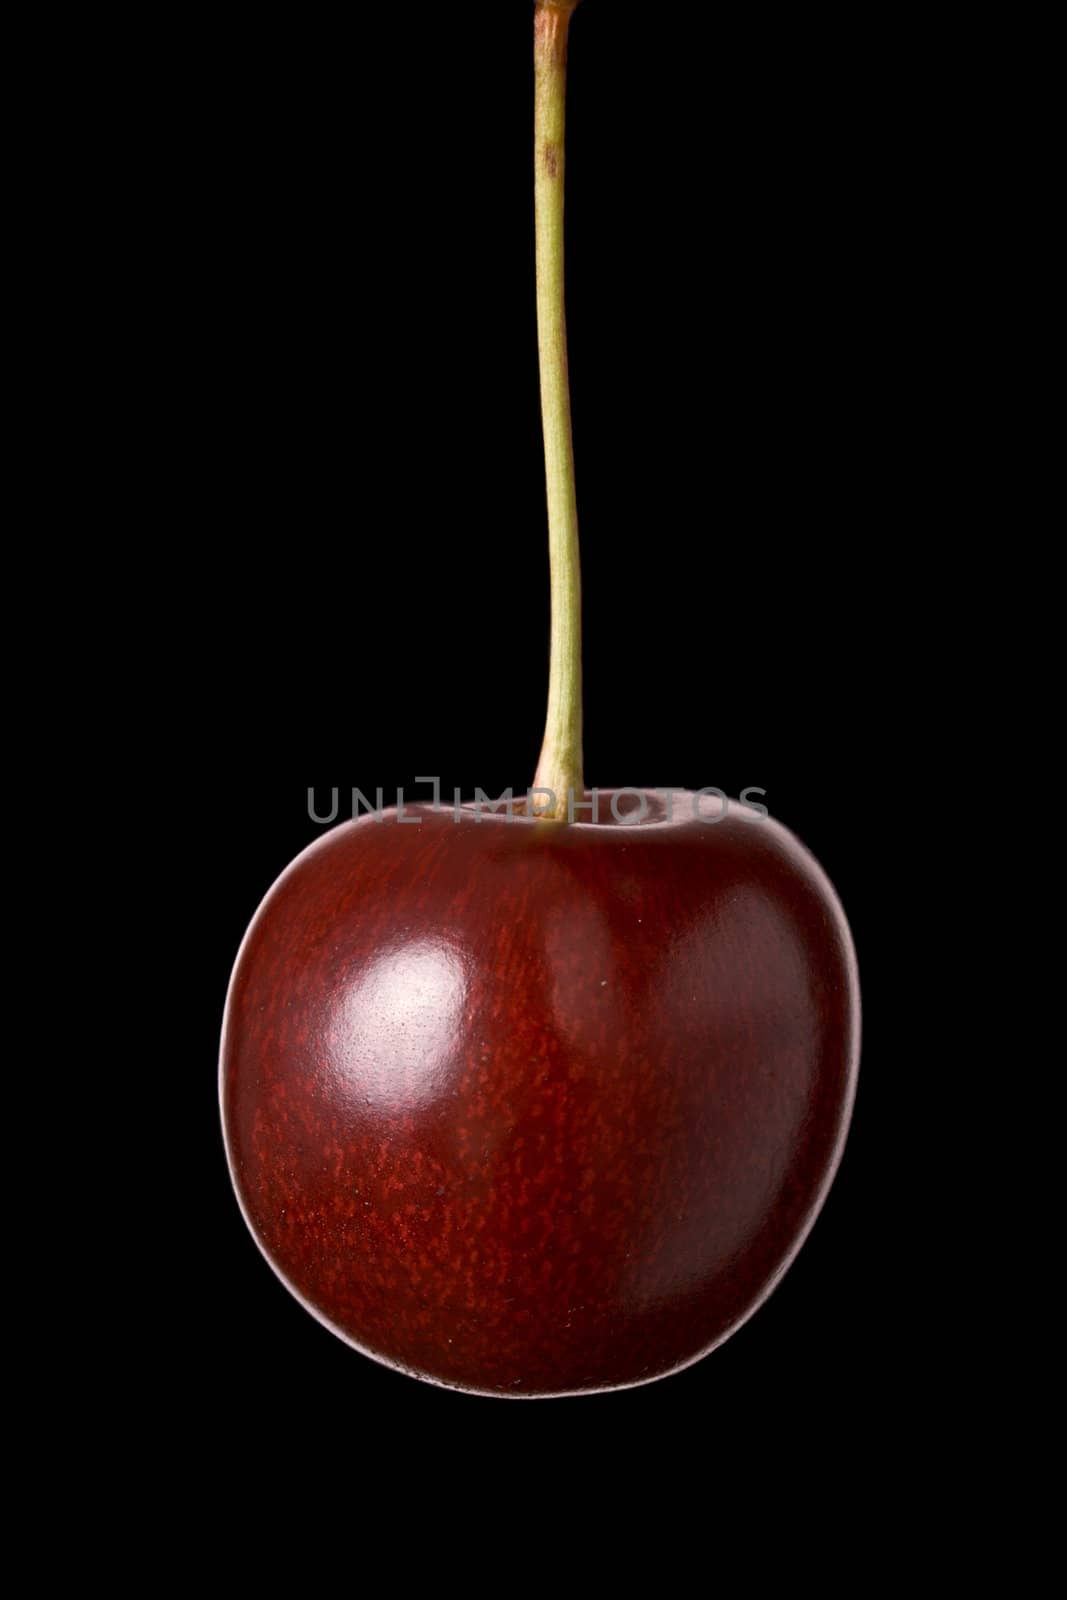 Cherry hanging isolated on black